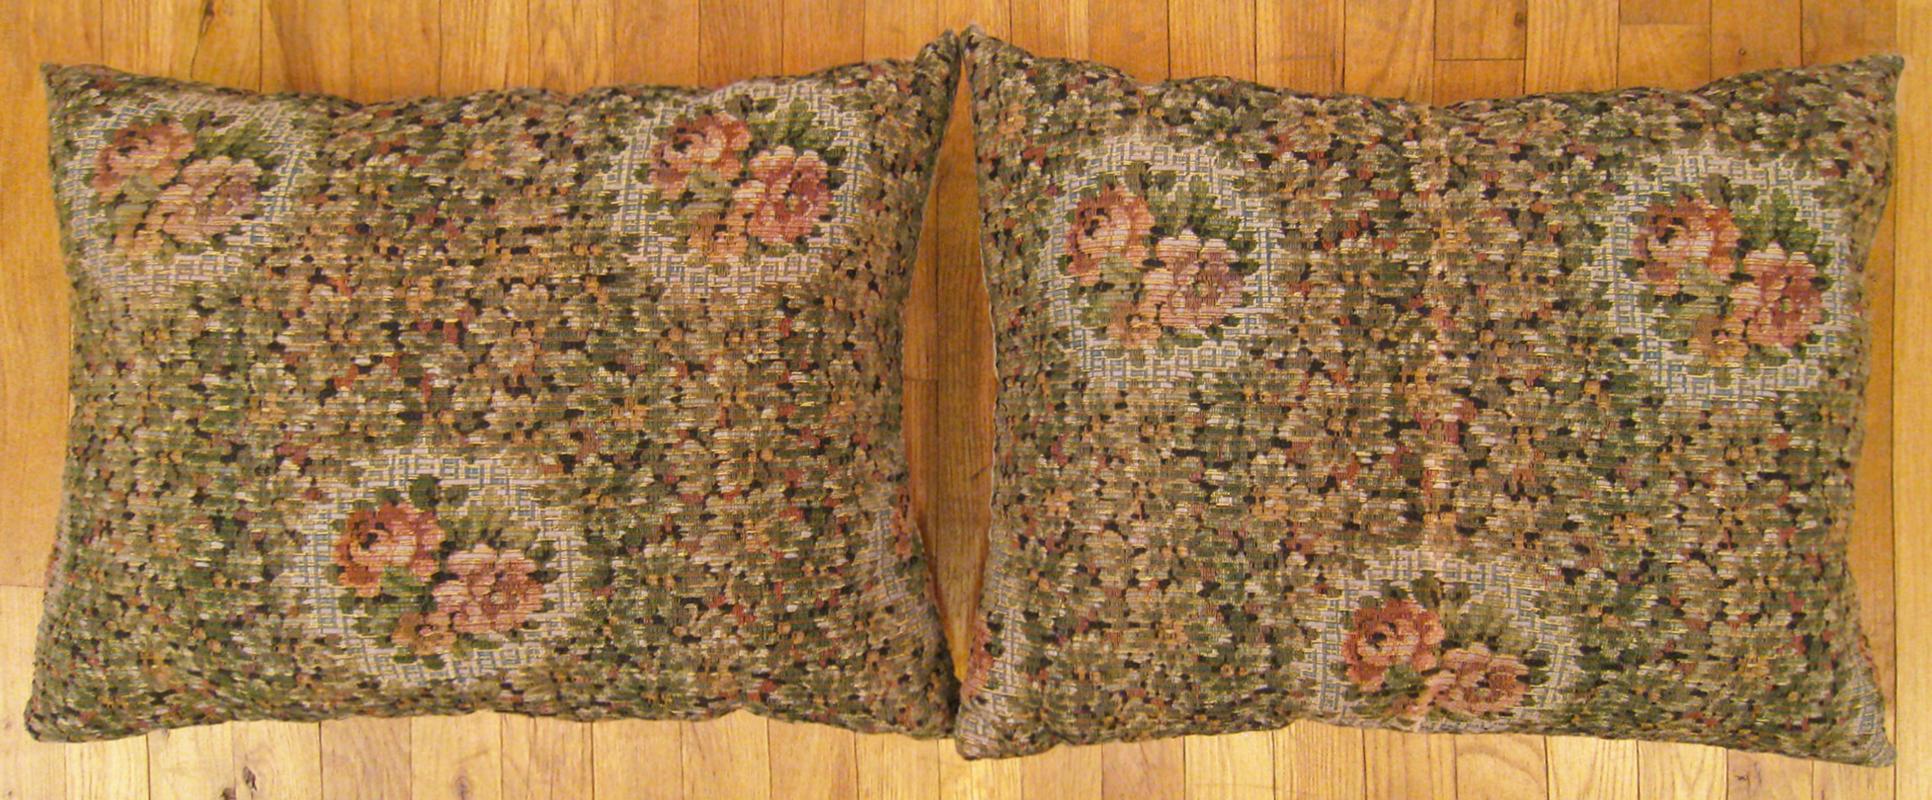 A pair of antique jacquard tapestry pillows ; size 2'0” x 1'8” each.

An antique decorative pillows with floral elments allover a green central field, size 2'0